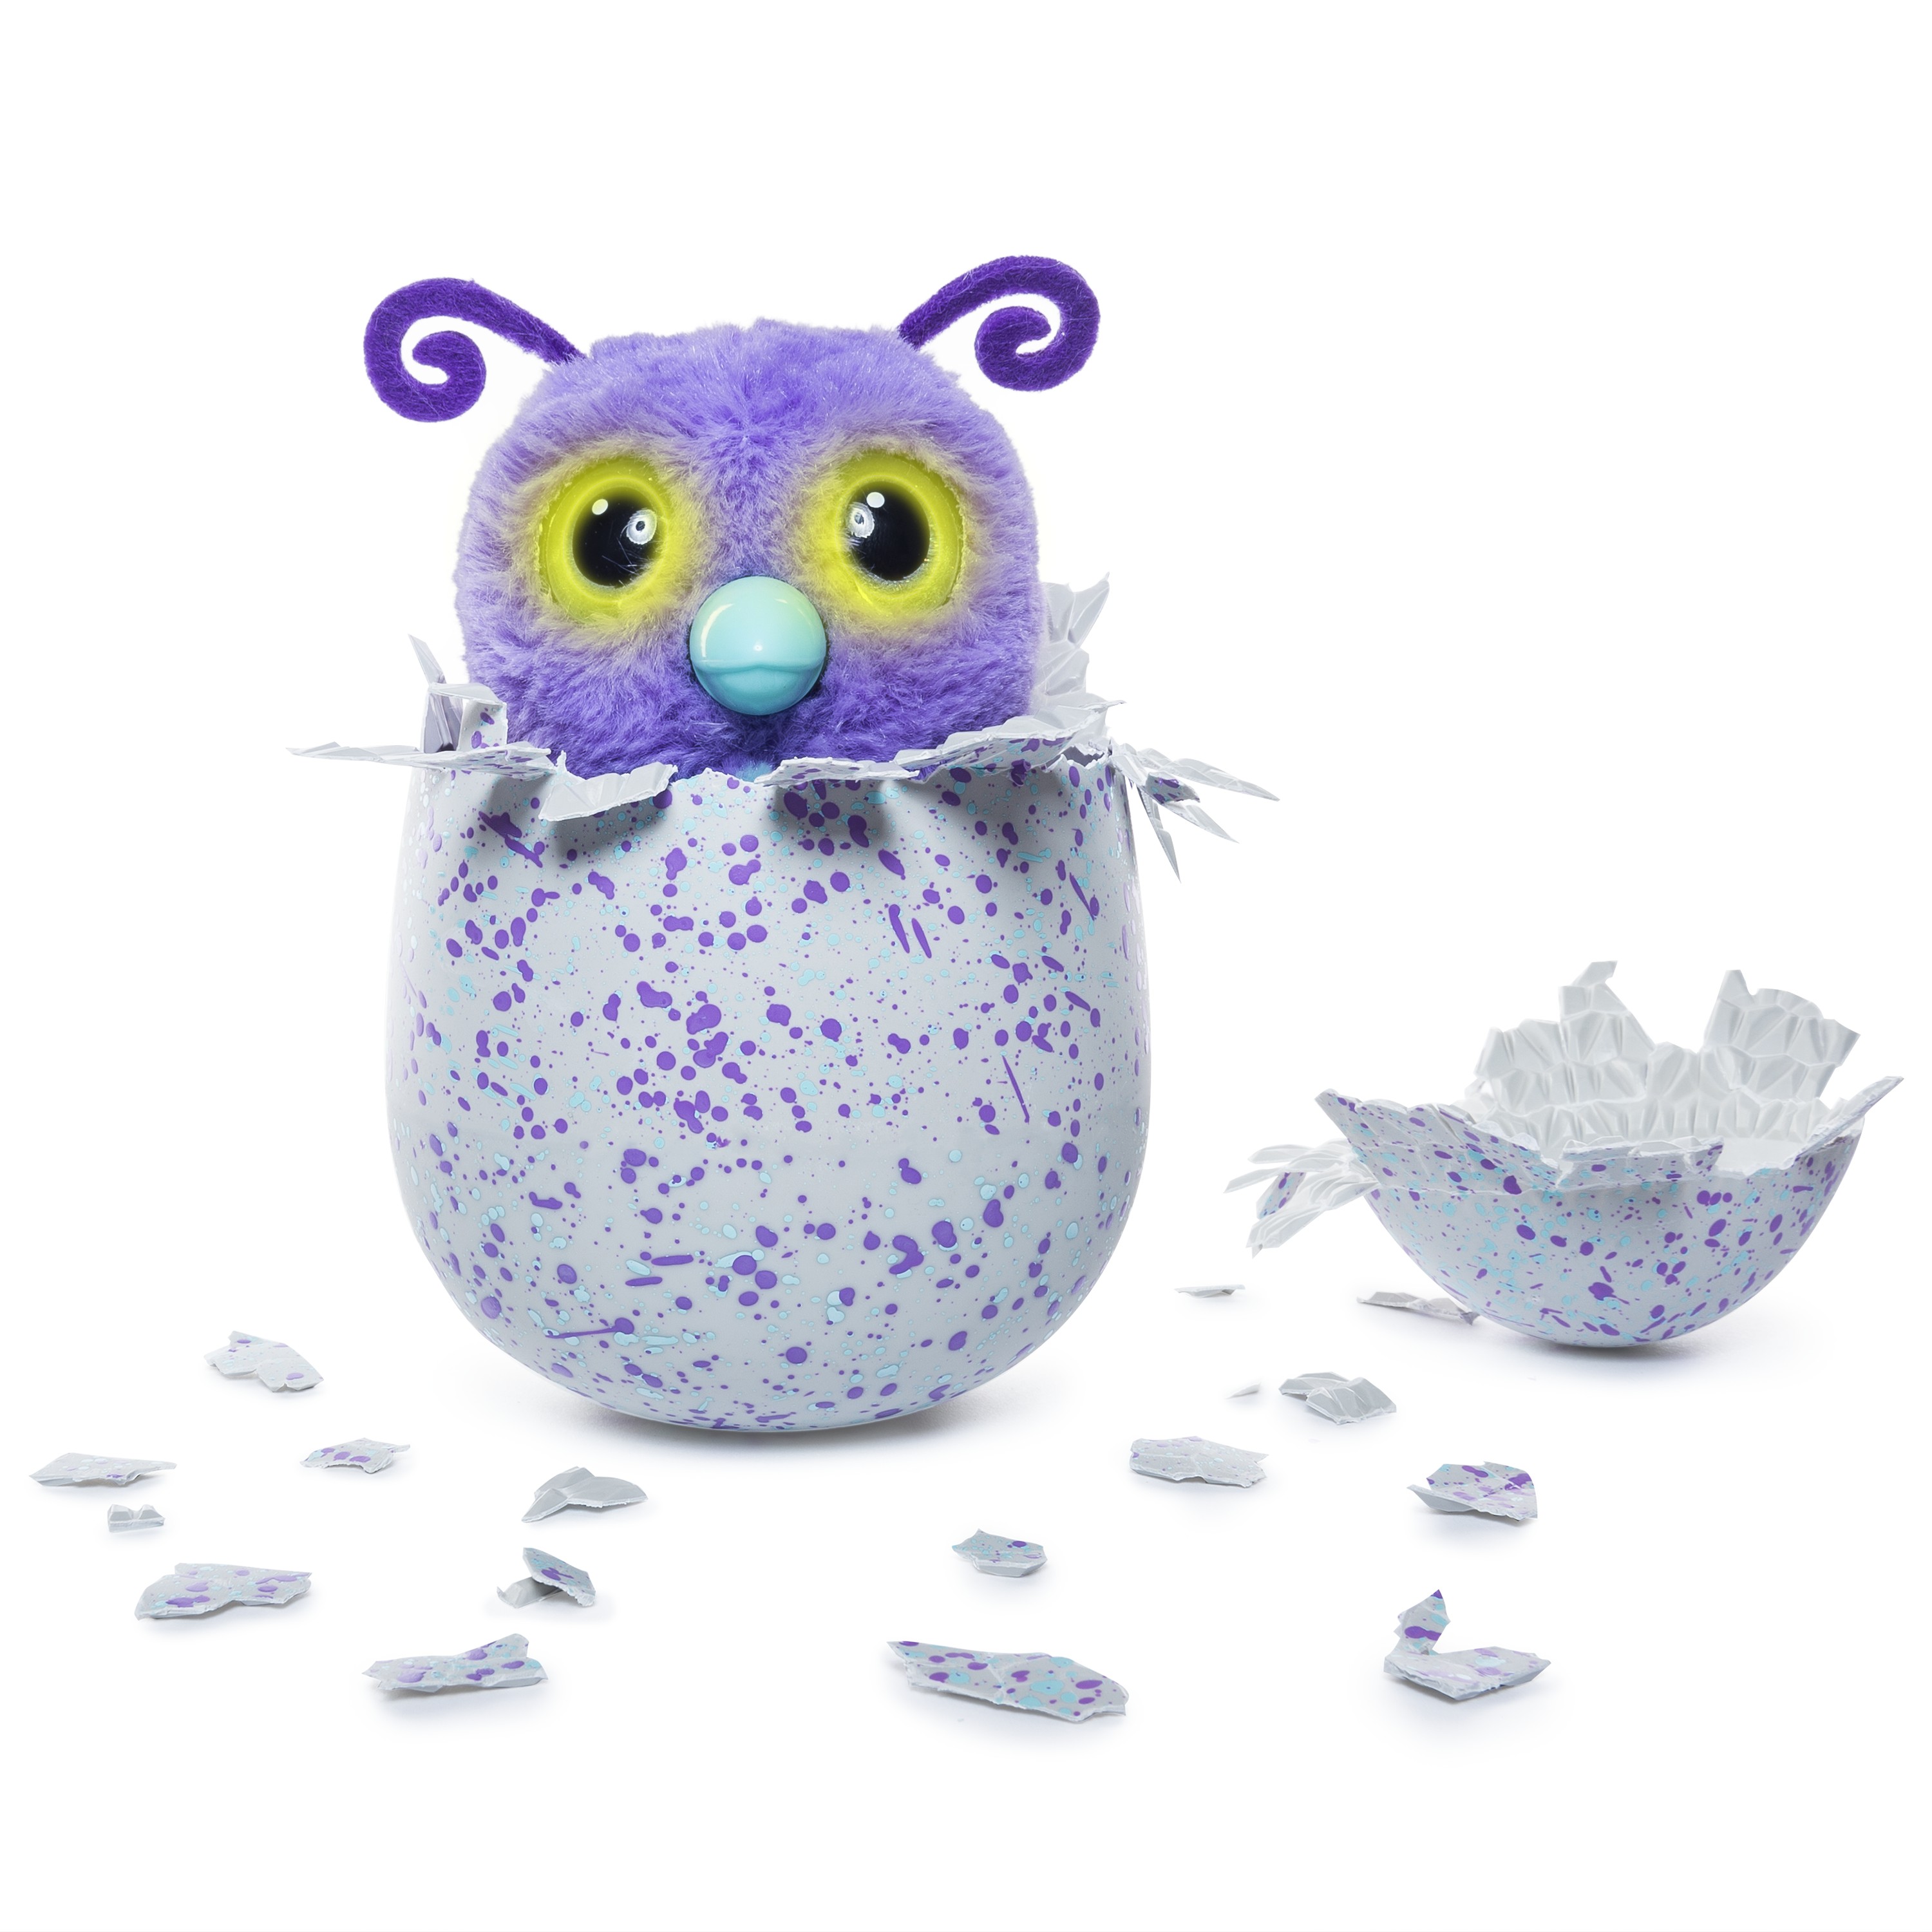 Hatchimals - Hatching Egg - Interactive Creature - Burtle - Purple/Teal Egg - Walmart Exclusive by Spin Master - image 5 of 7